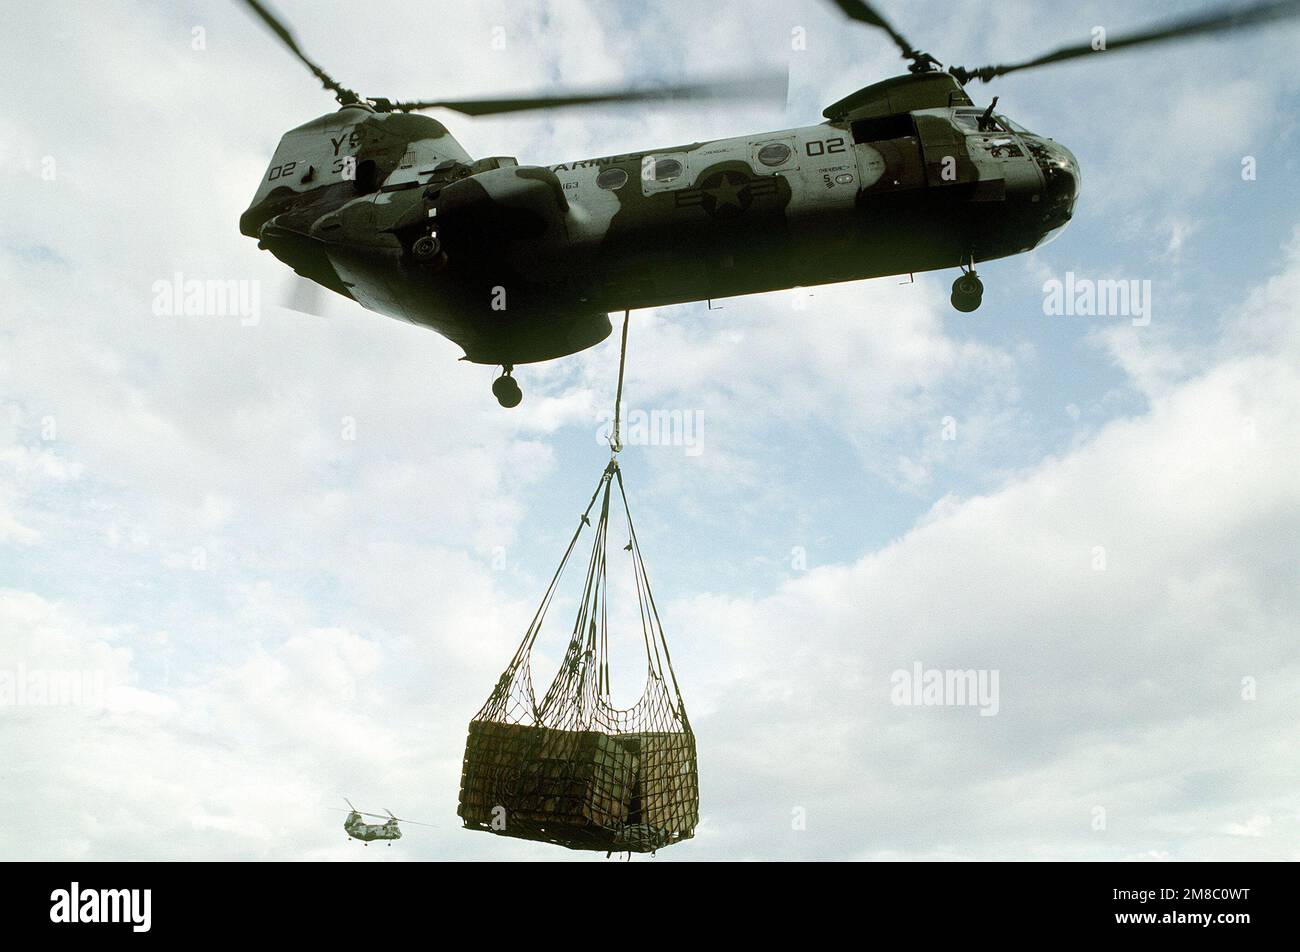 A CH-46E SEA Knight helicopter of Marine Medium Helicopter Squadron 163 (HMM-163) carries supplies on a sling during the joint Thai/U.S. exercise Thalay Thai '89. Subject Operation/Series: THALAY THAI '89 Country: Thailand (THA) Stock Photo